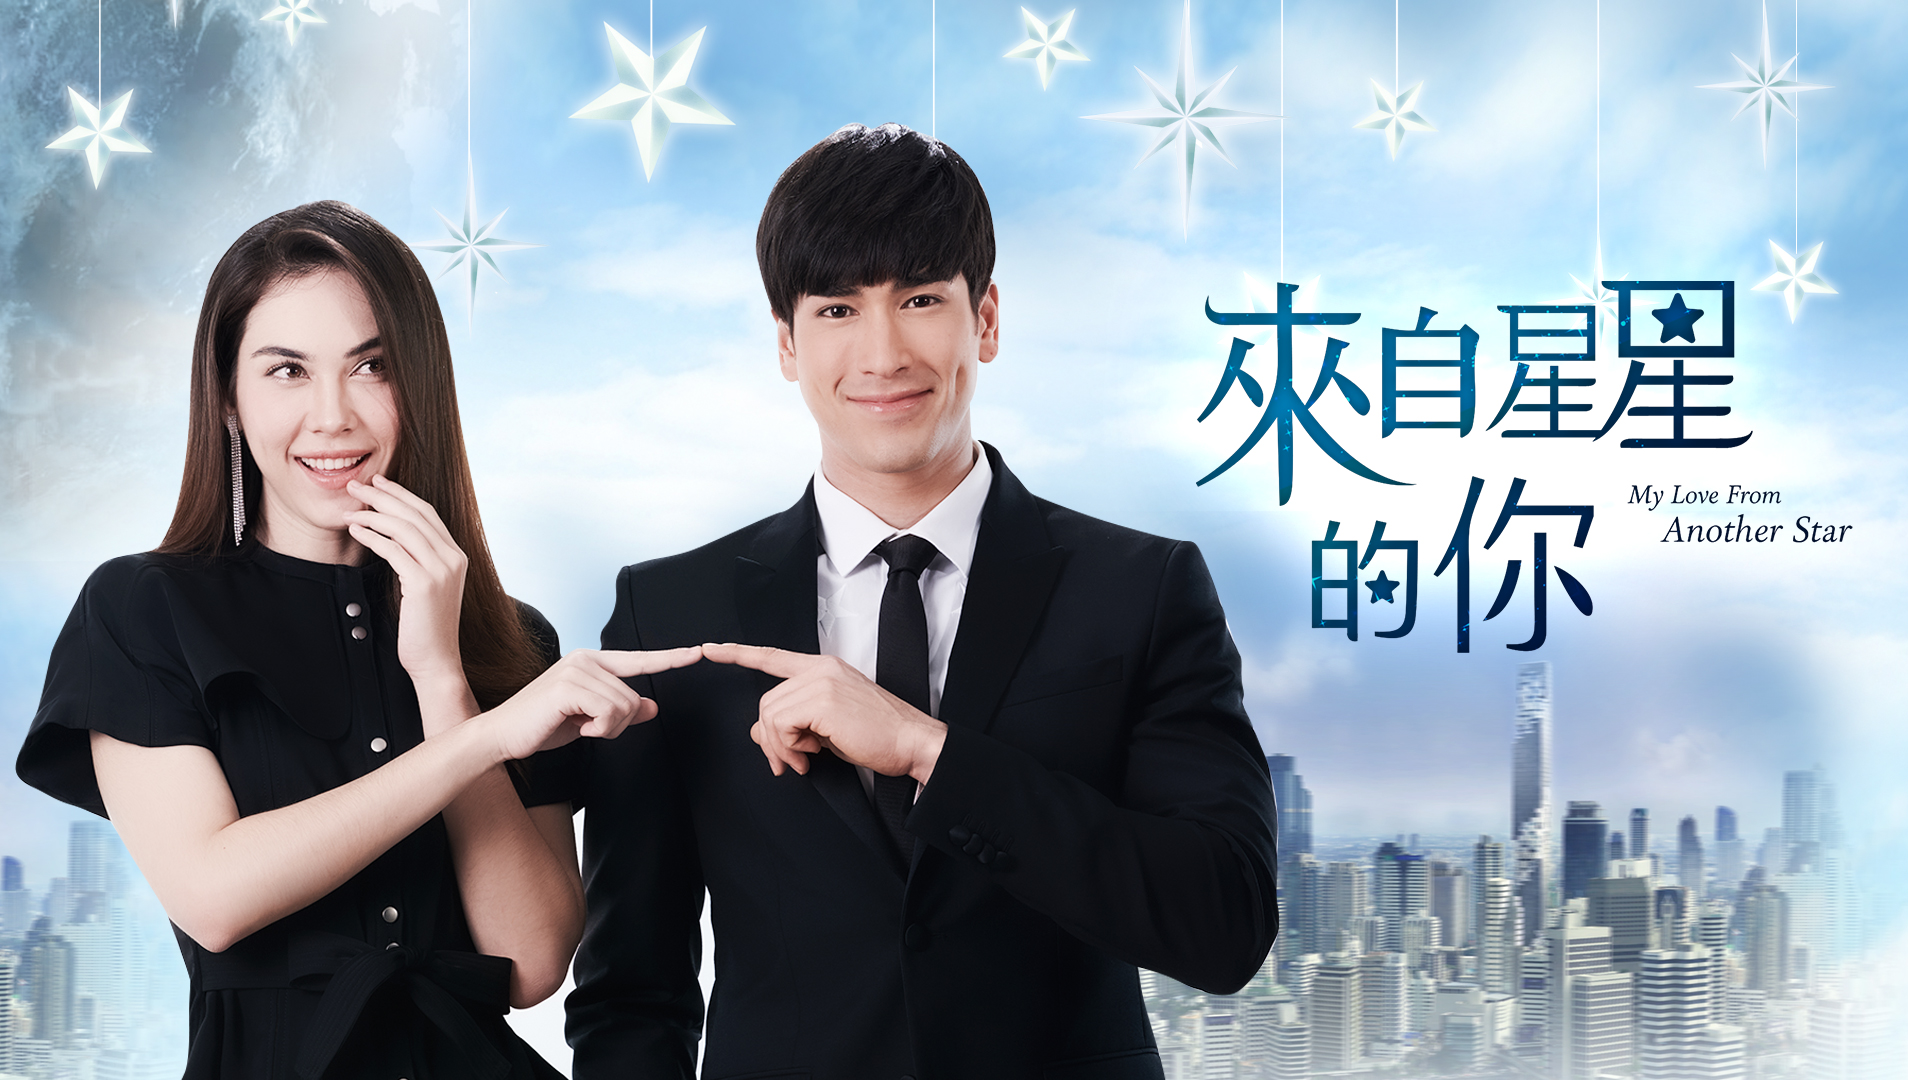 EP1: My Love From The Star (CHN ver.) - Watch HD Video Online - WeTV